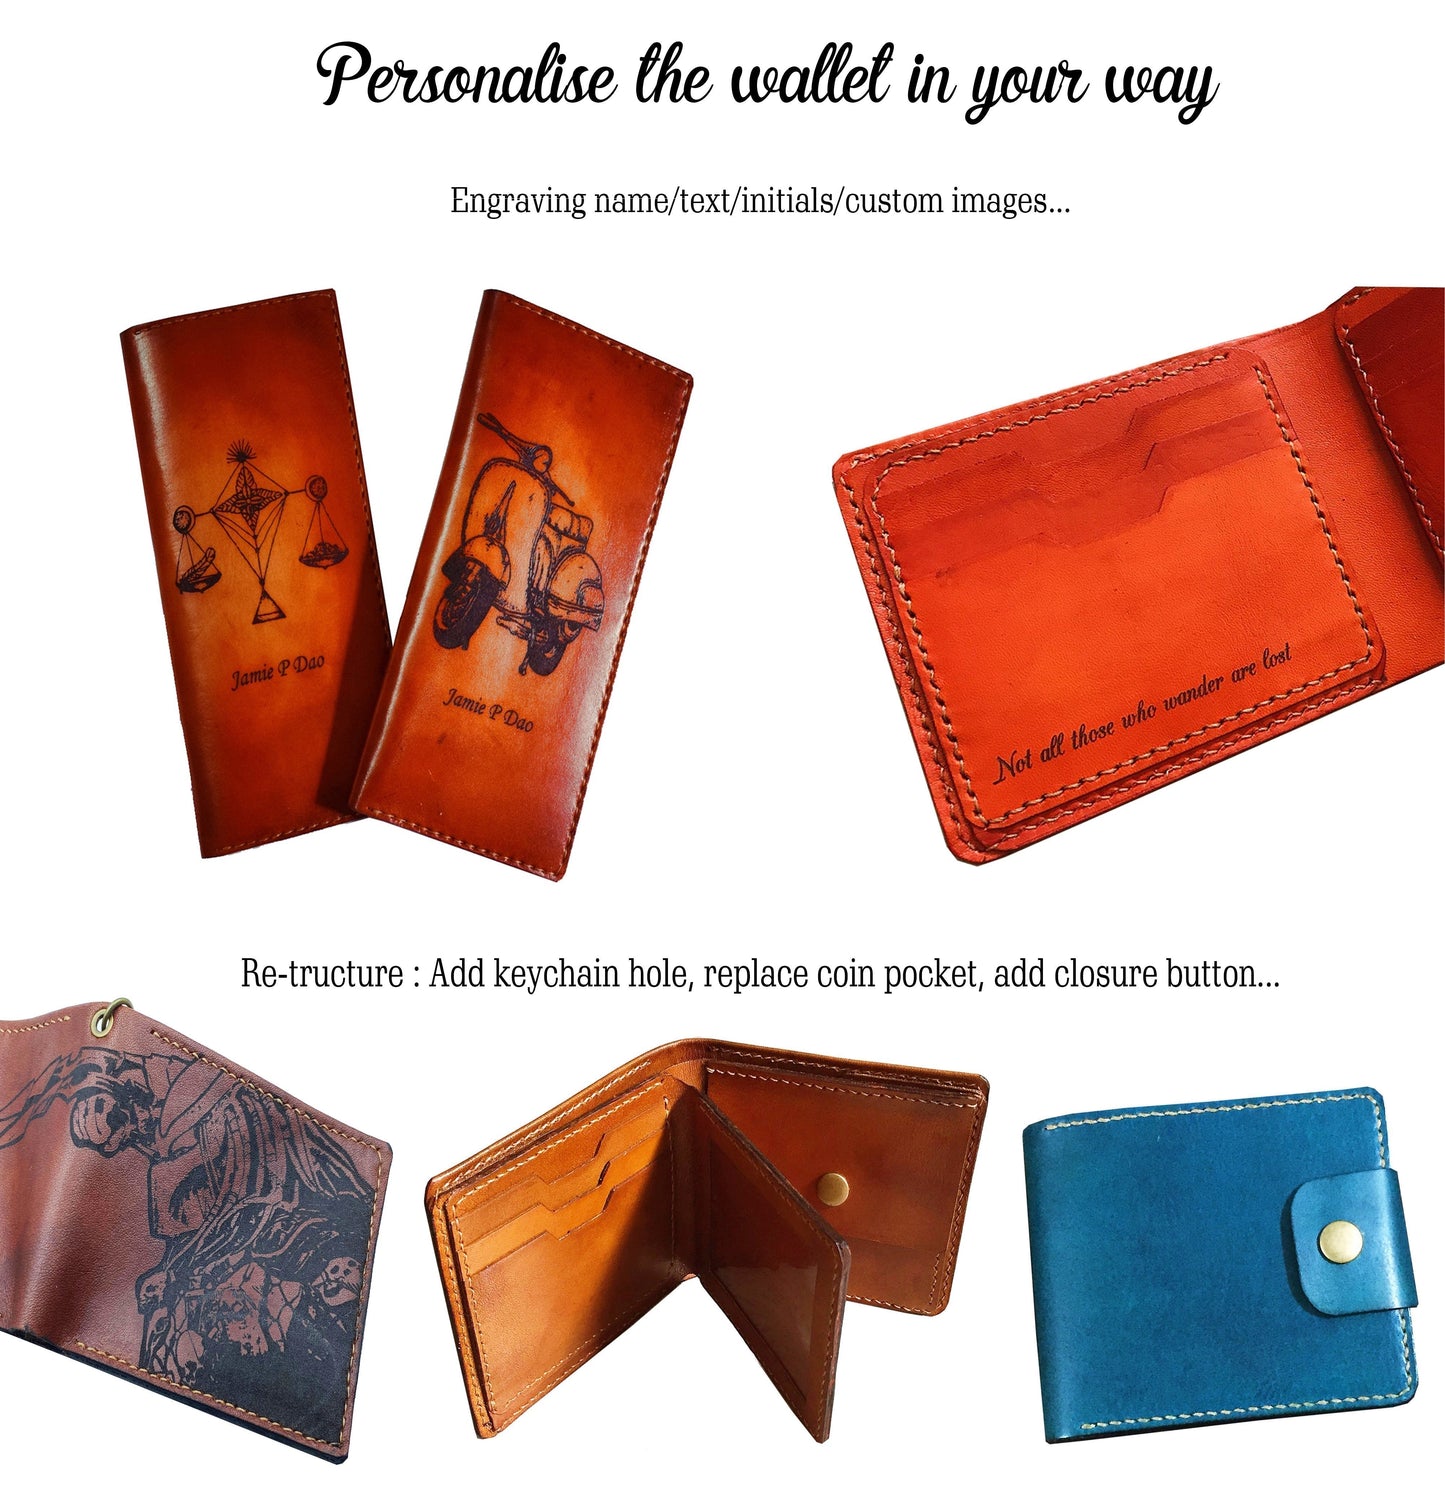 Mayan Corner - Personalized genuine leather handmade wallet, leather gift ideas for him, ninja turtle leather art wallet - 01112216